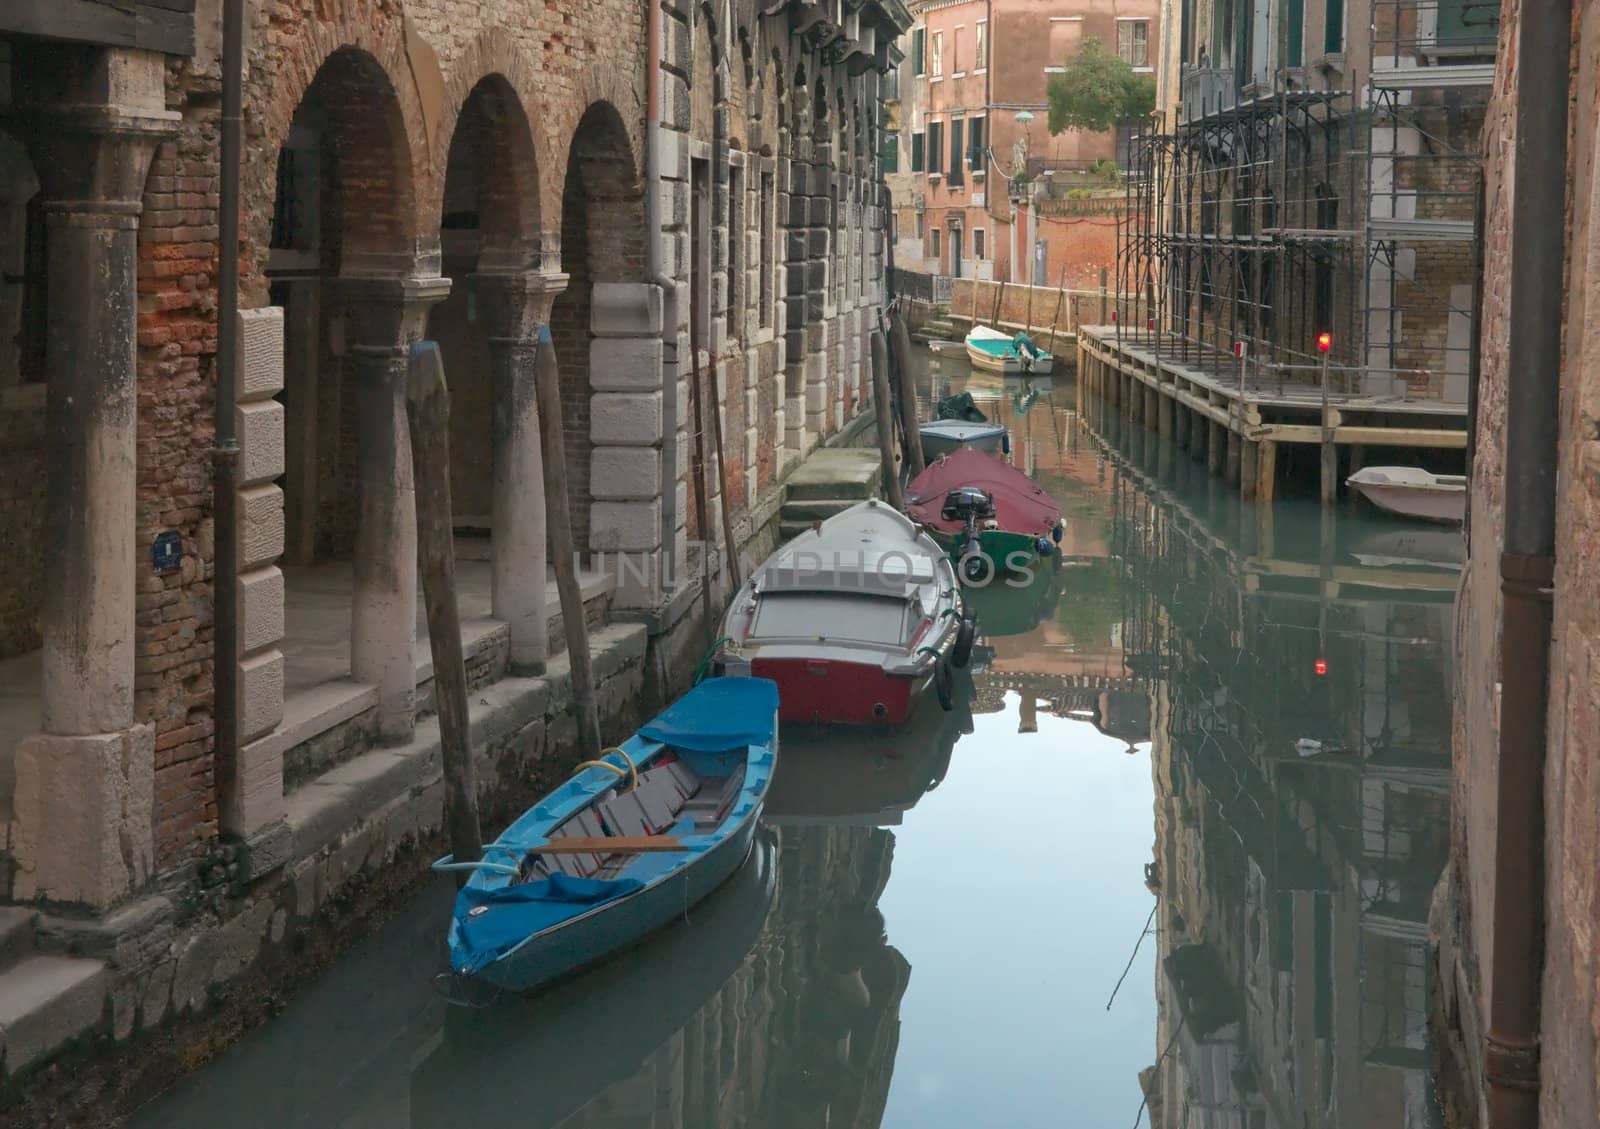 Venice Canal at dusk. Boats and reflections.